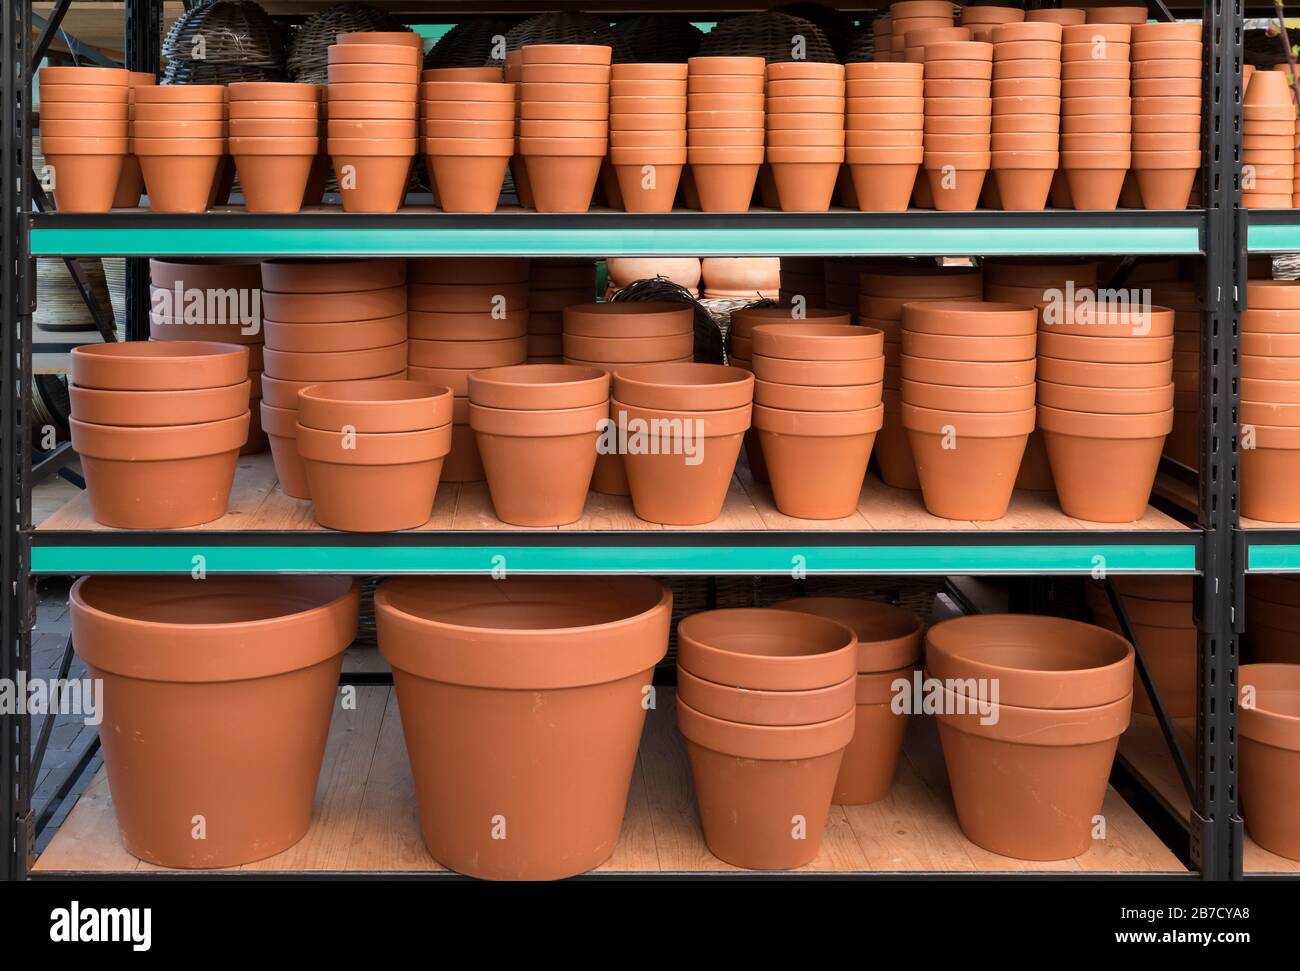 Ceramic flower pots for sale at the market Stock Photo